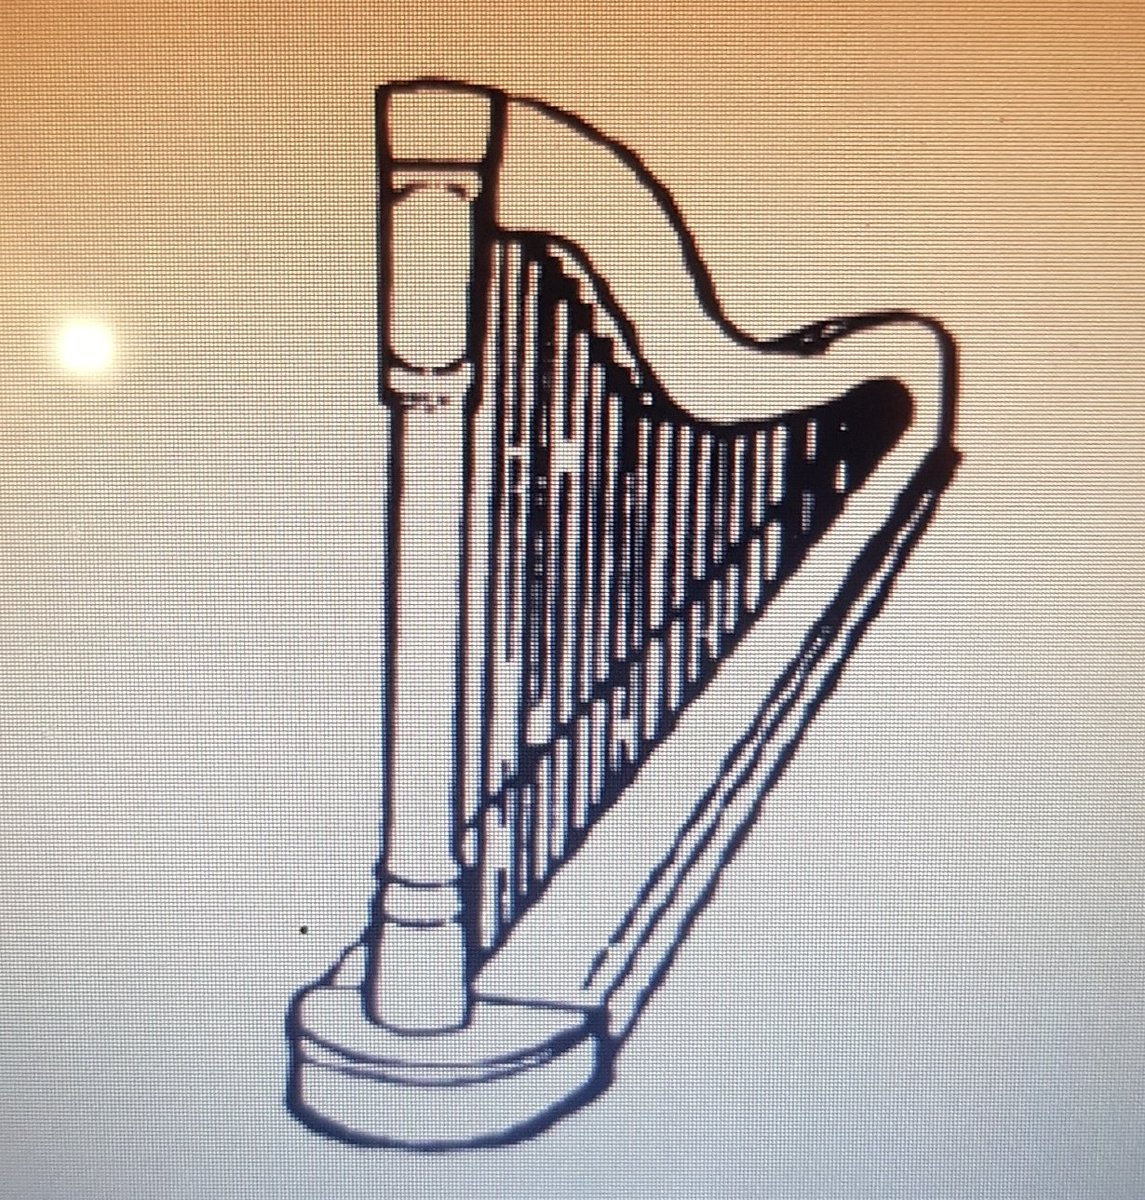 Let's start with an easy one- a language task. In this question you're supposed to look at the picture and name what it is - a harp. How do you think we could adapt it for South Asians? What image would you put?